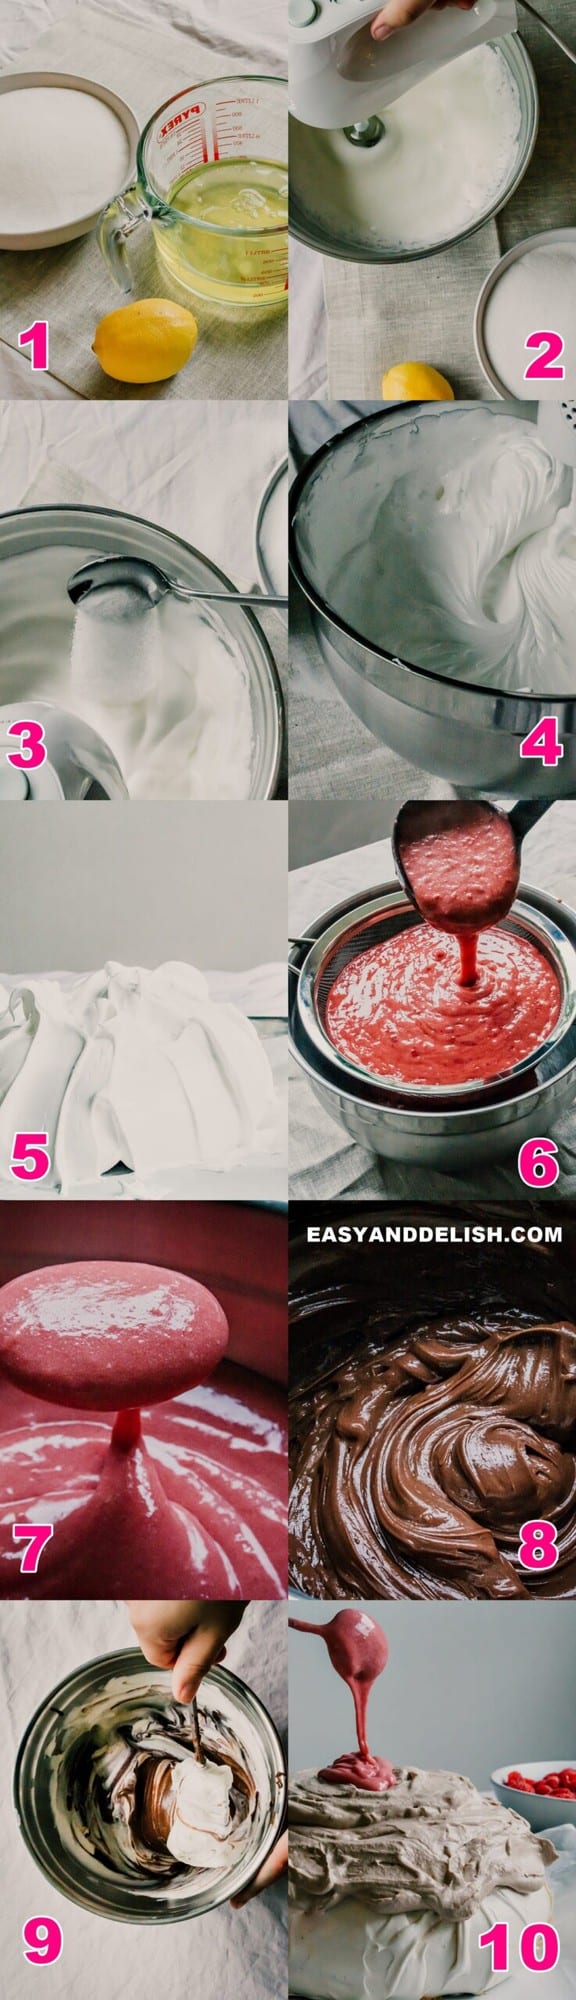 photo collage showing how to make pavlova, cream, and curd